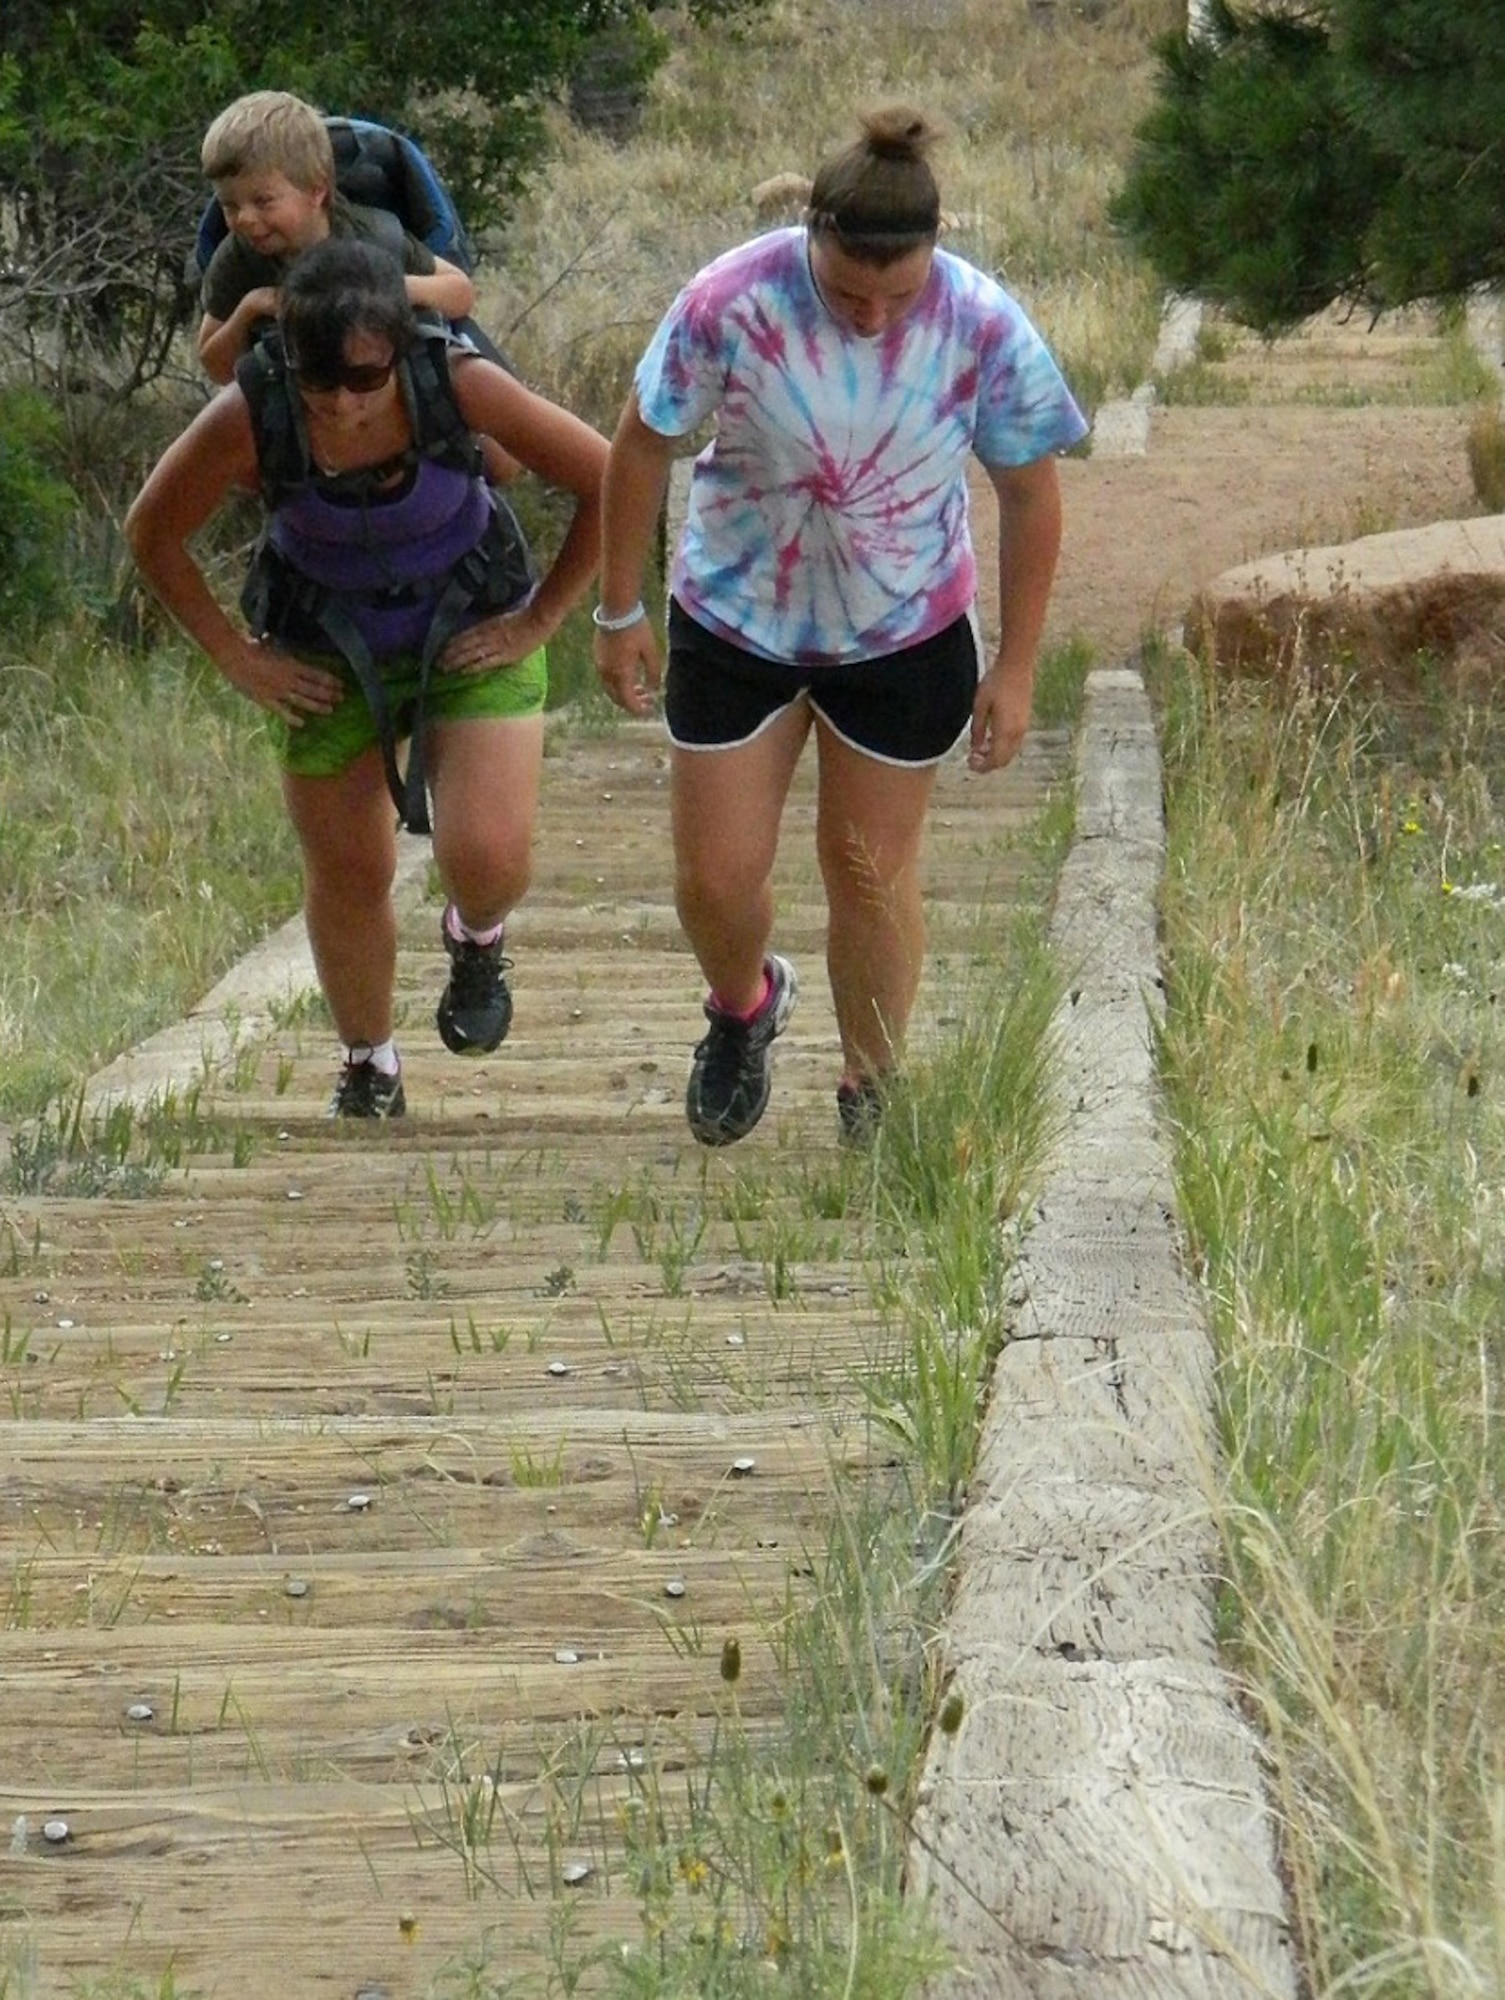 Renee and Anika Soerensen climb the Stairway to Heaven for round two of their workout up and down the 300-plus steps. Both mother and daughter train on the stairway regularly to condition for the Manitou Incline and hunting season. (U.S. Air Force photo/Amber Baillie)